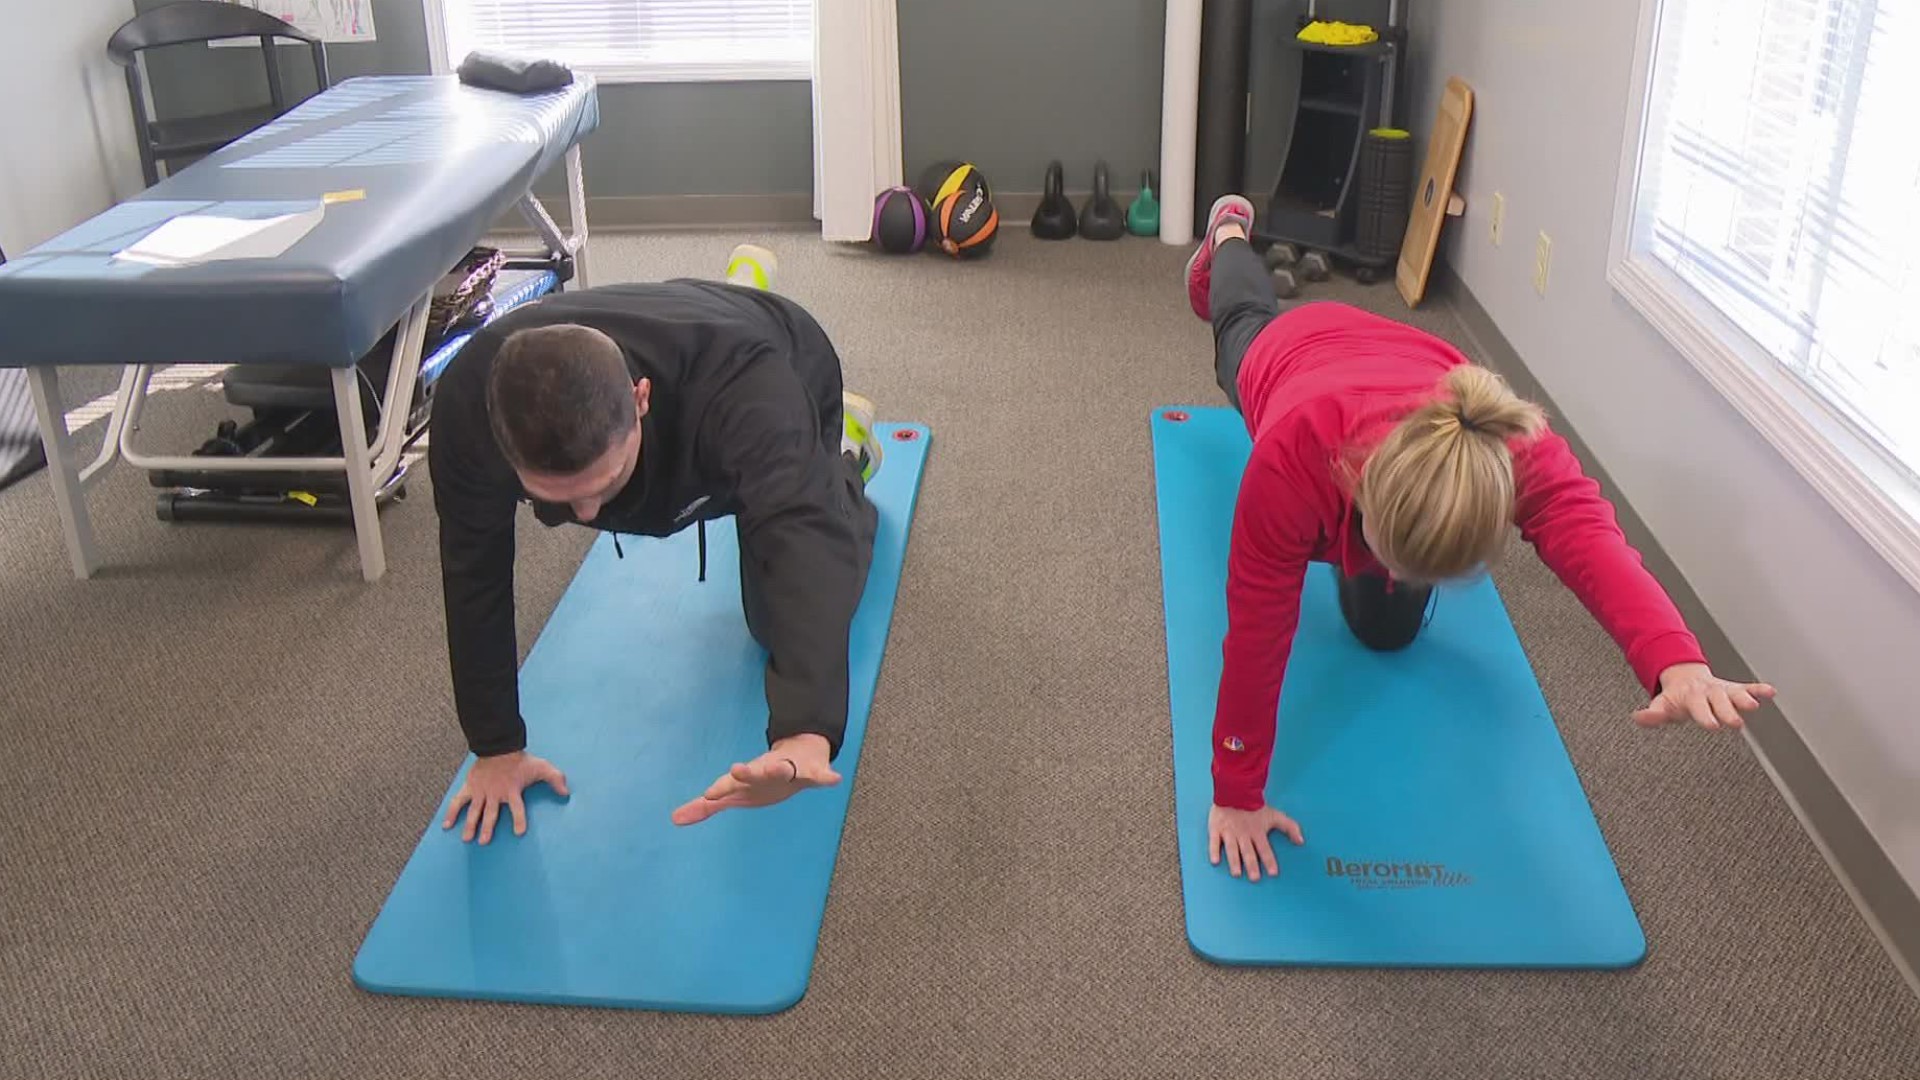 The bird dog exercise strengthens your upper and lower back and can be done at home.